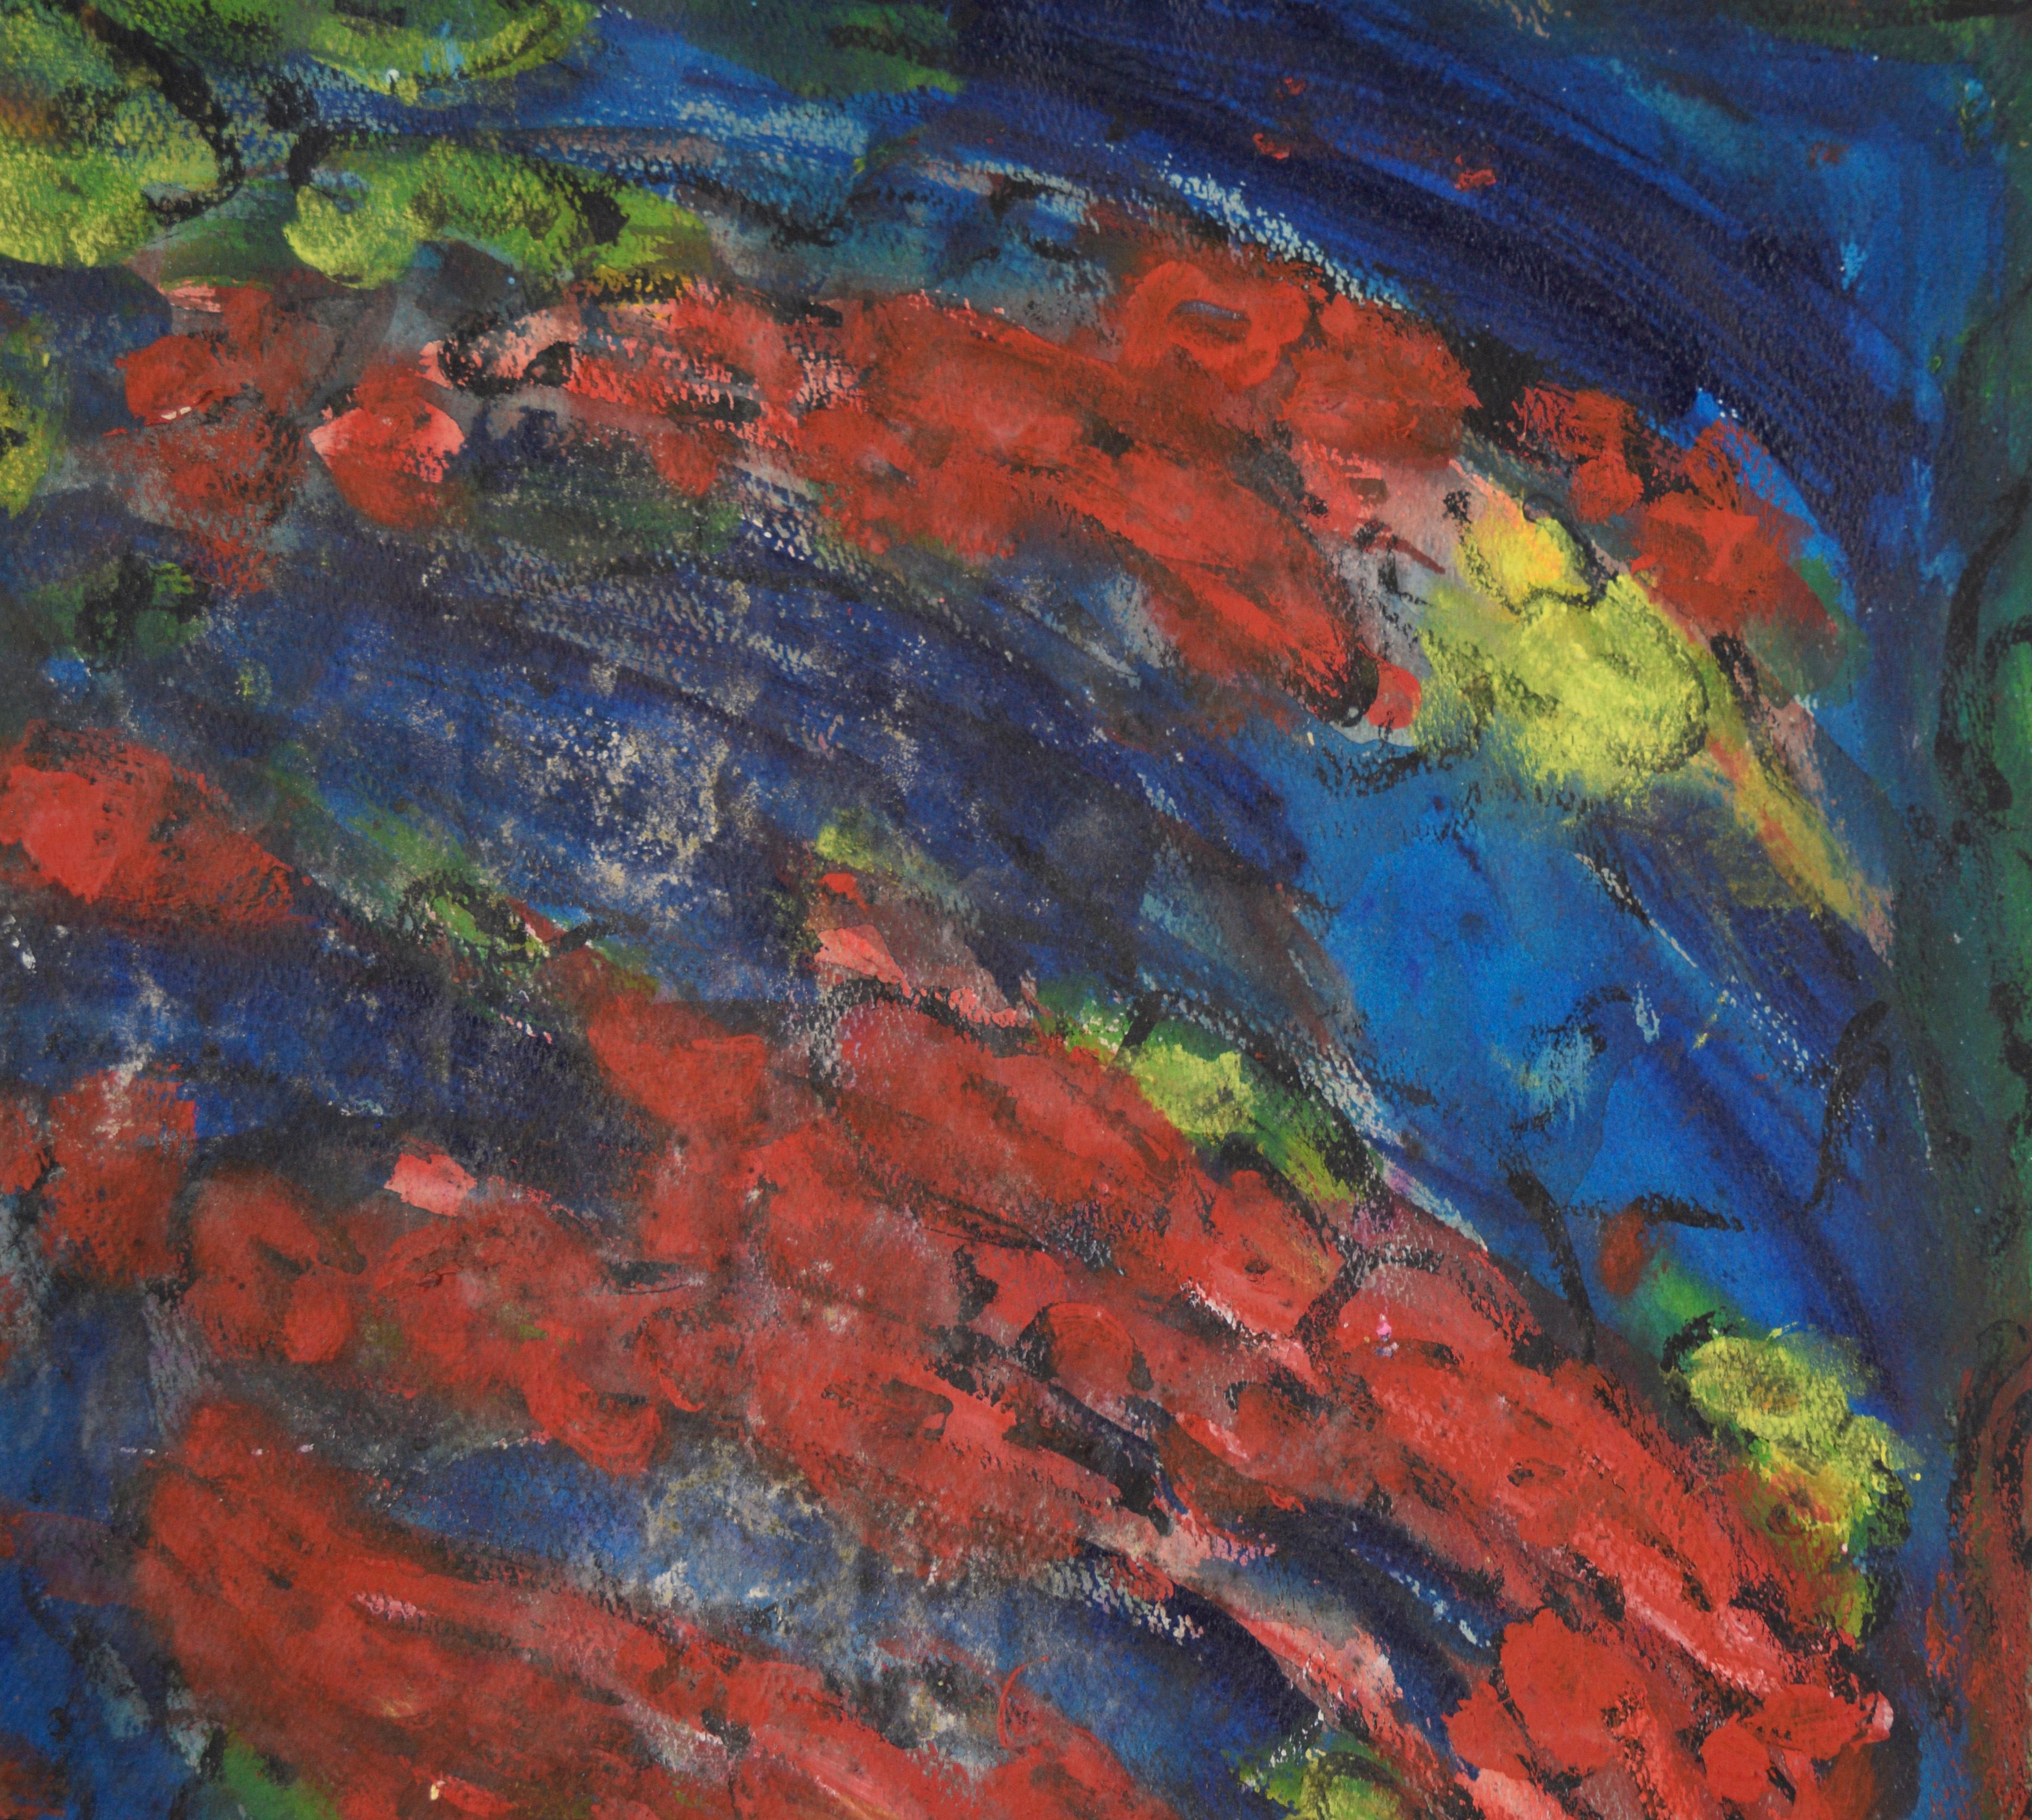 Bay Area Abstract Expressionist Composition in Oil on Cardboard

San Francisco Bay area abstract expressionist composition by Honora Berg (American, 1897-1985). Blue, red, and yellow-green patches swirl around each other, evoking the image of a